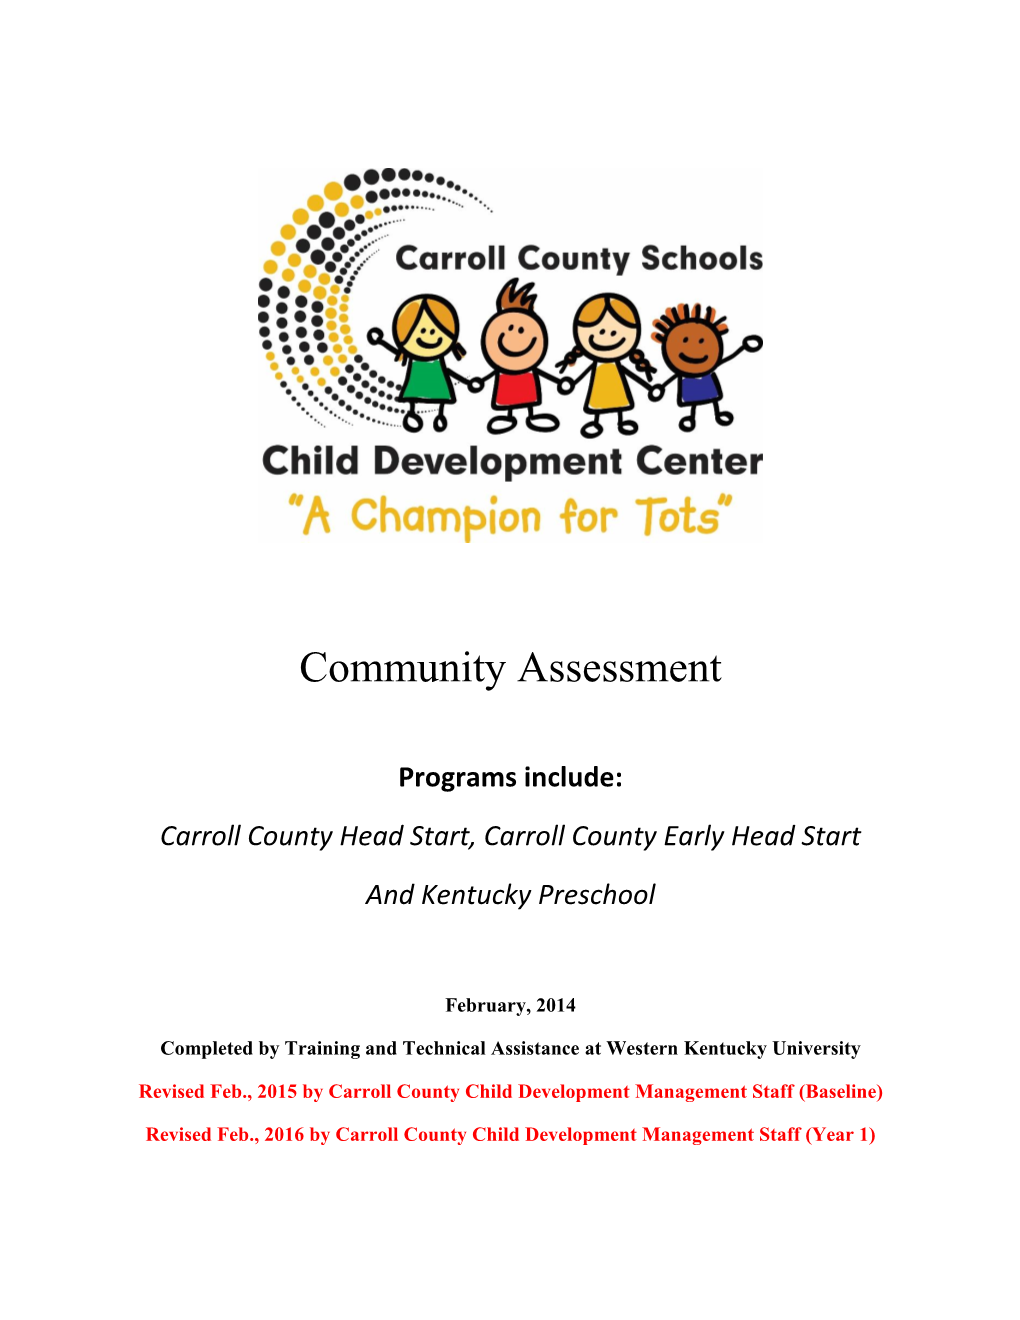 Carroll County Schools Is the Local Education Authority for Carroll County and Is Located in Carrollton, Kentucky